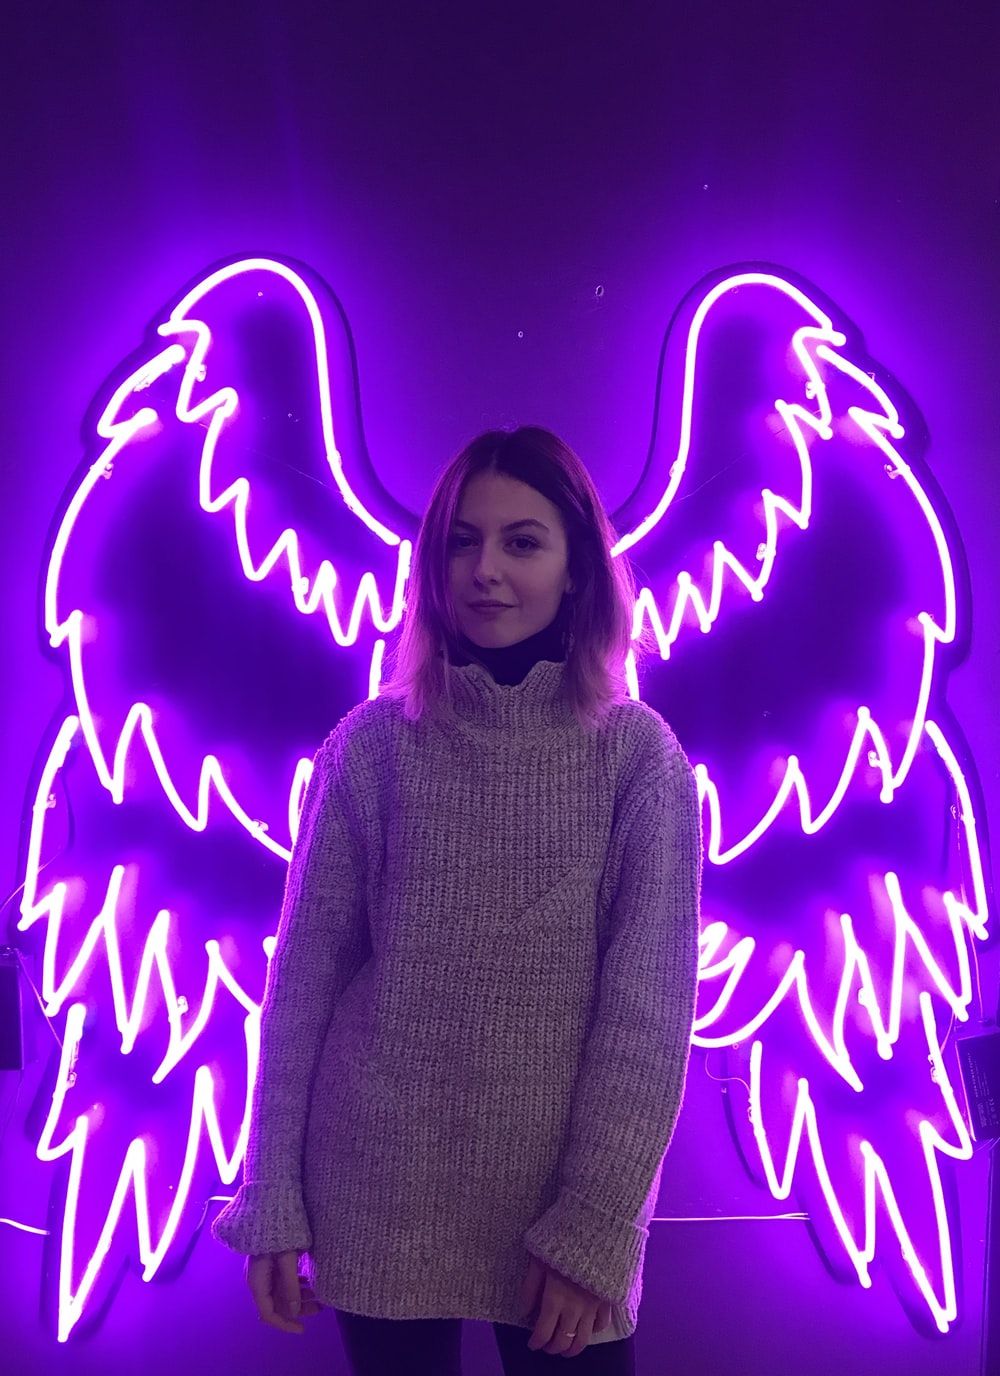 Neon Angel Picture. Download Free Image